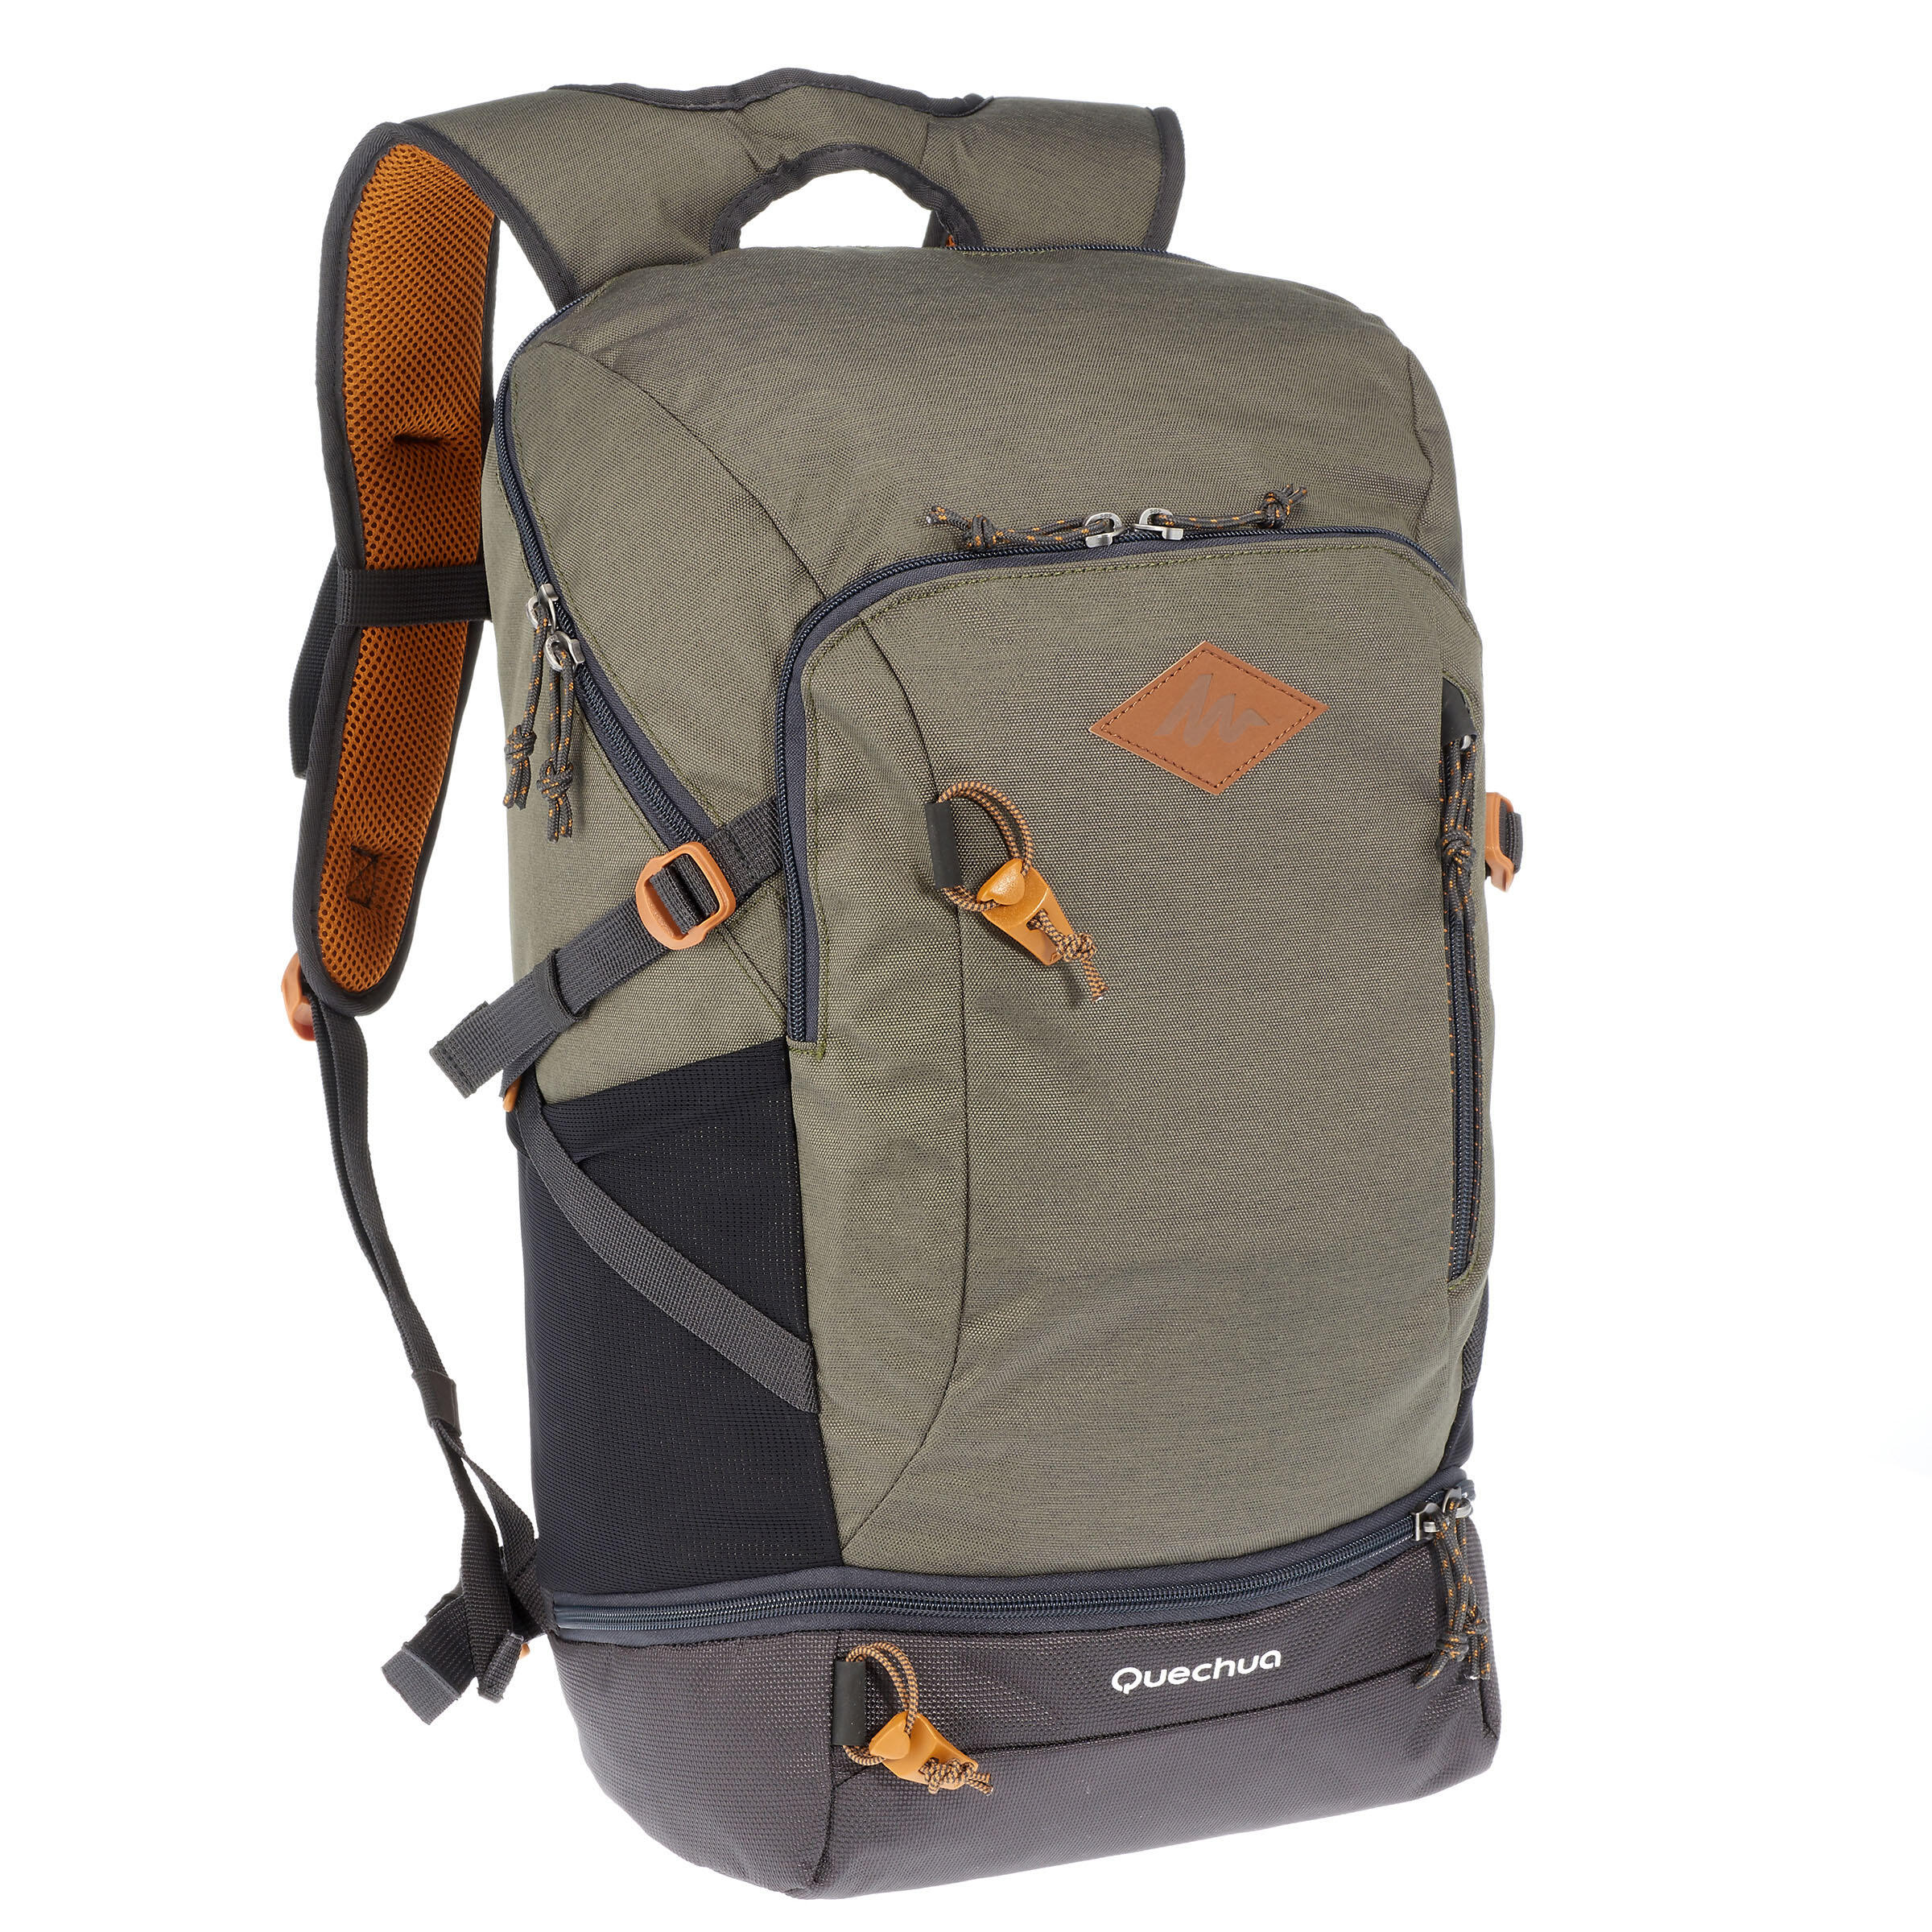 MH500 30-litre Hiking Backpack